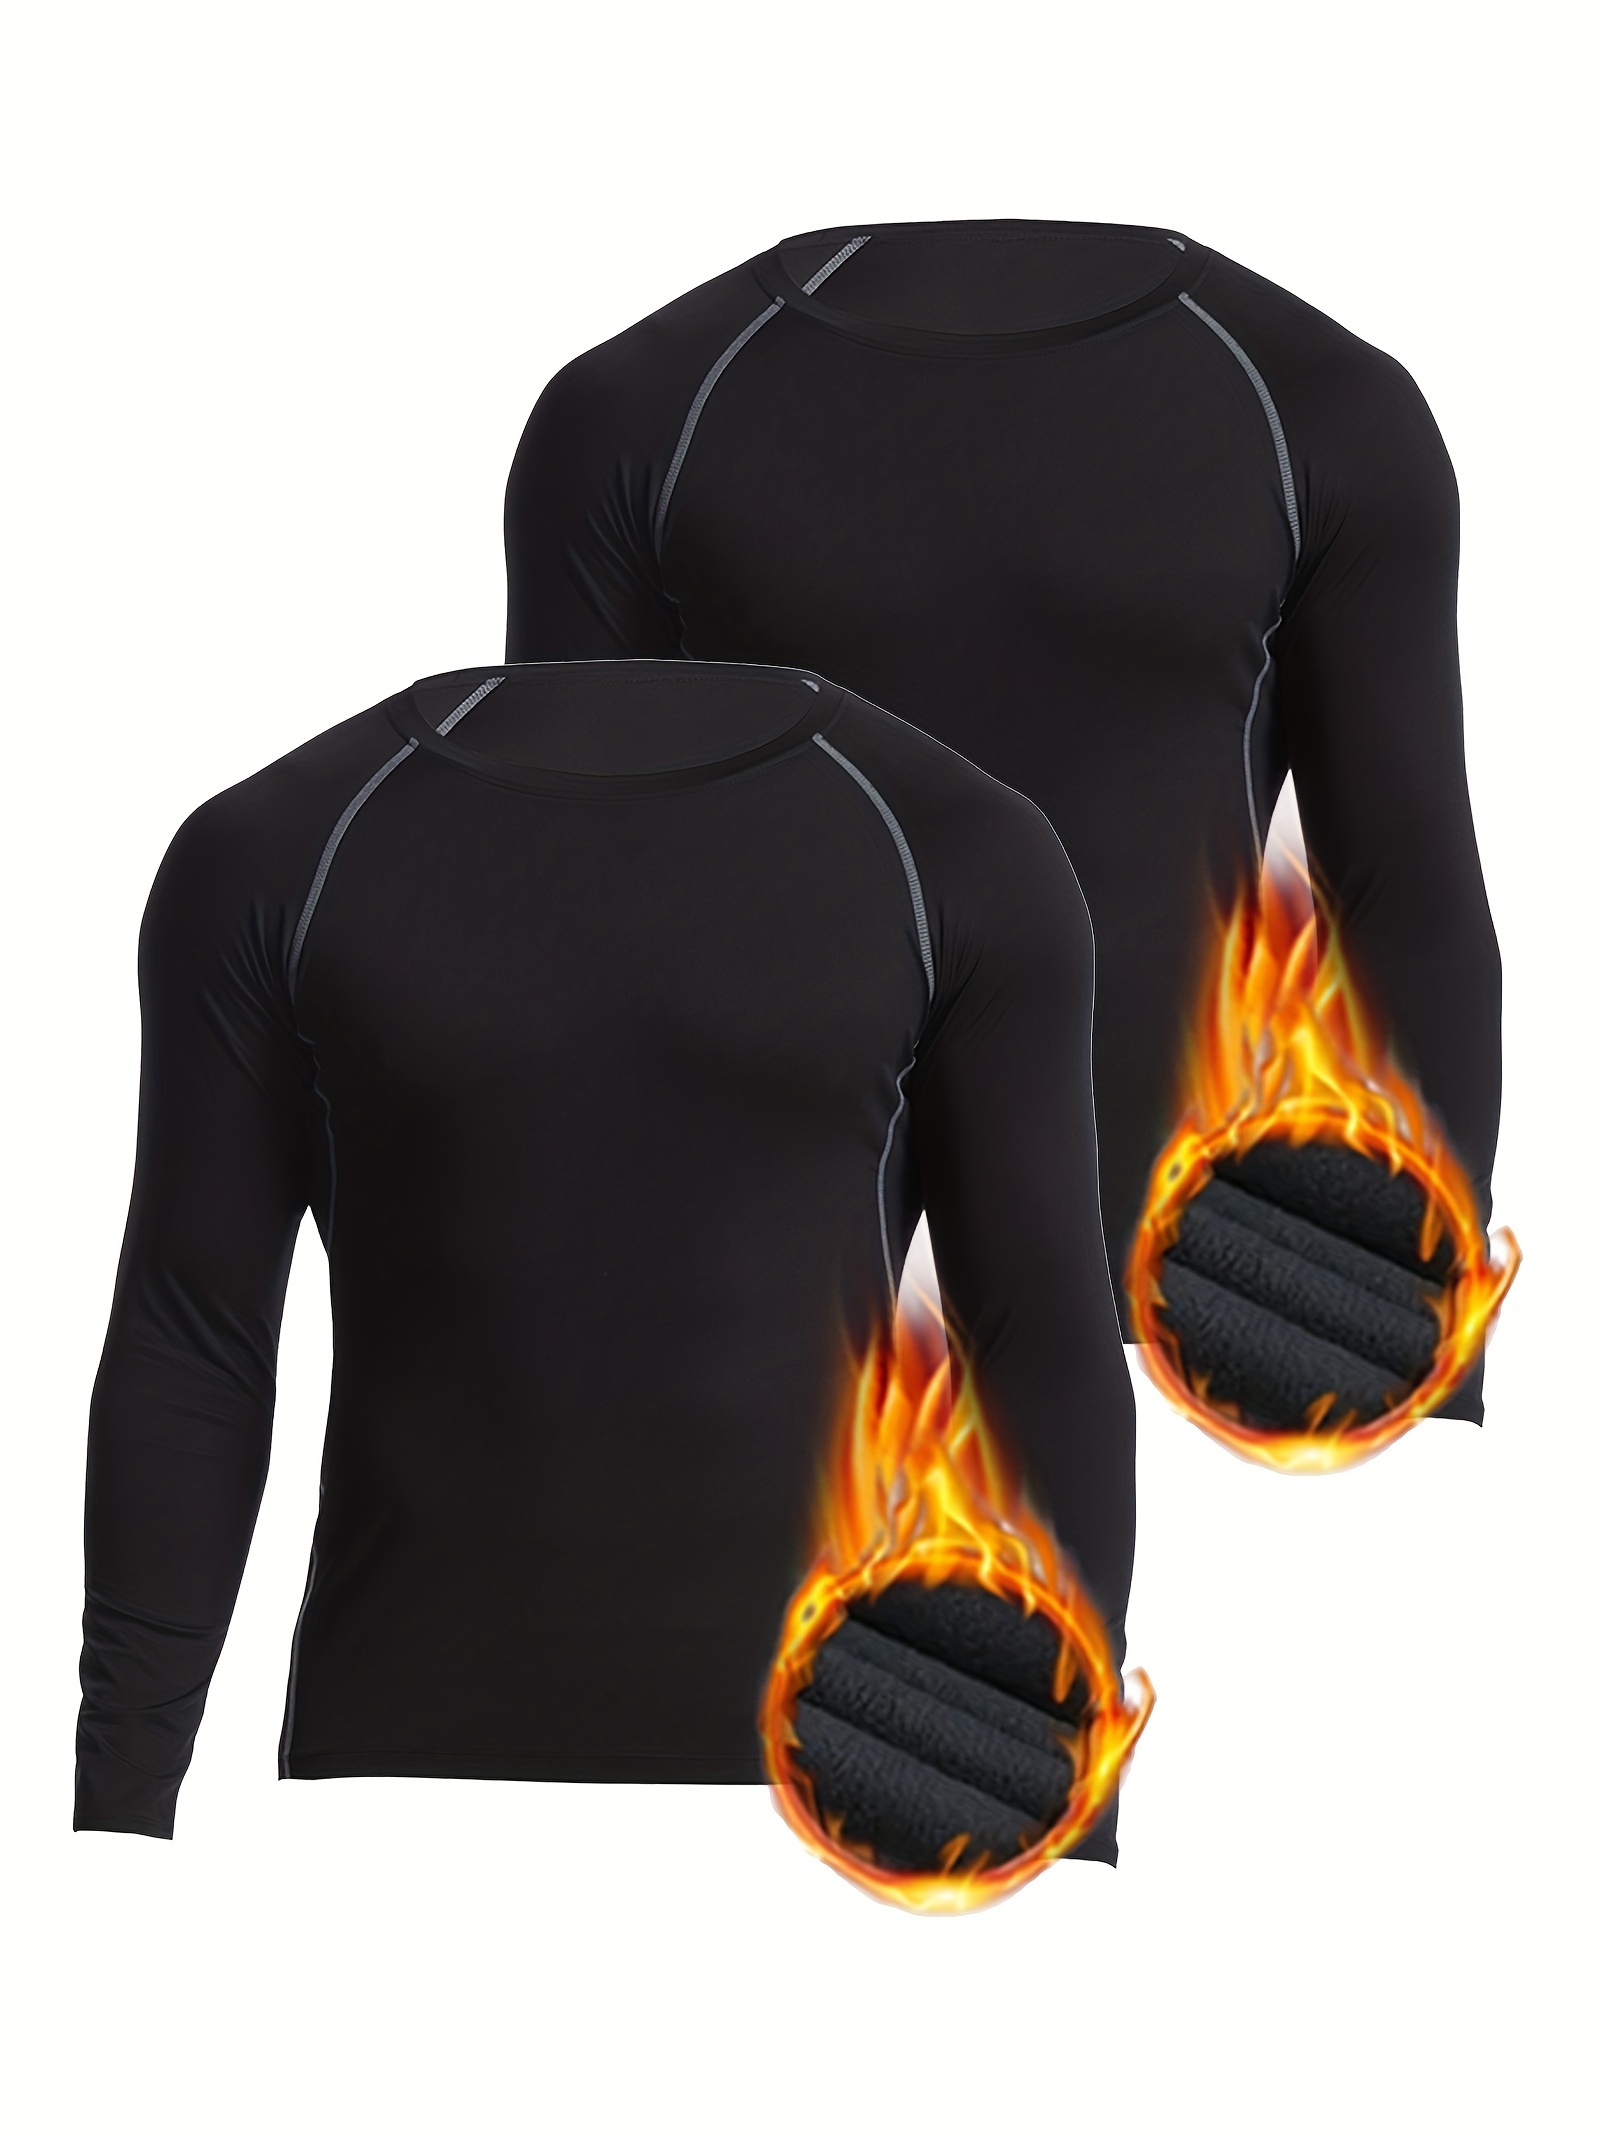 Truactivewear Thermals Thermal Sets Moisture Wicking Nepal